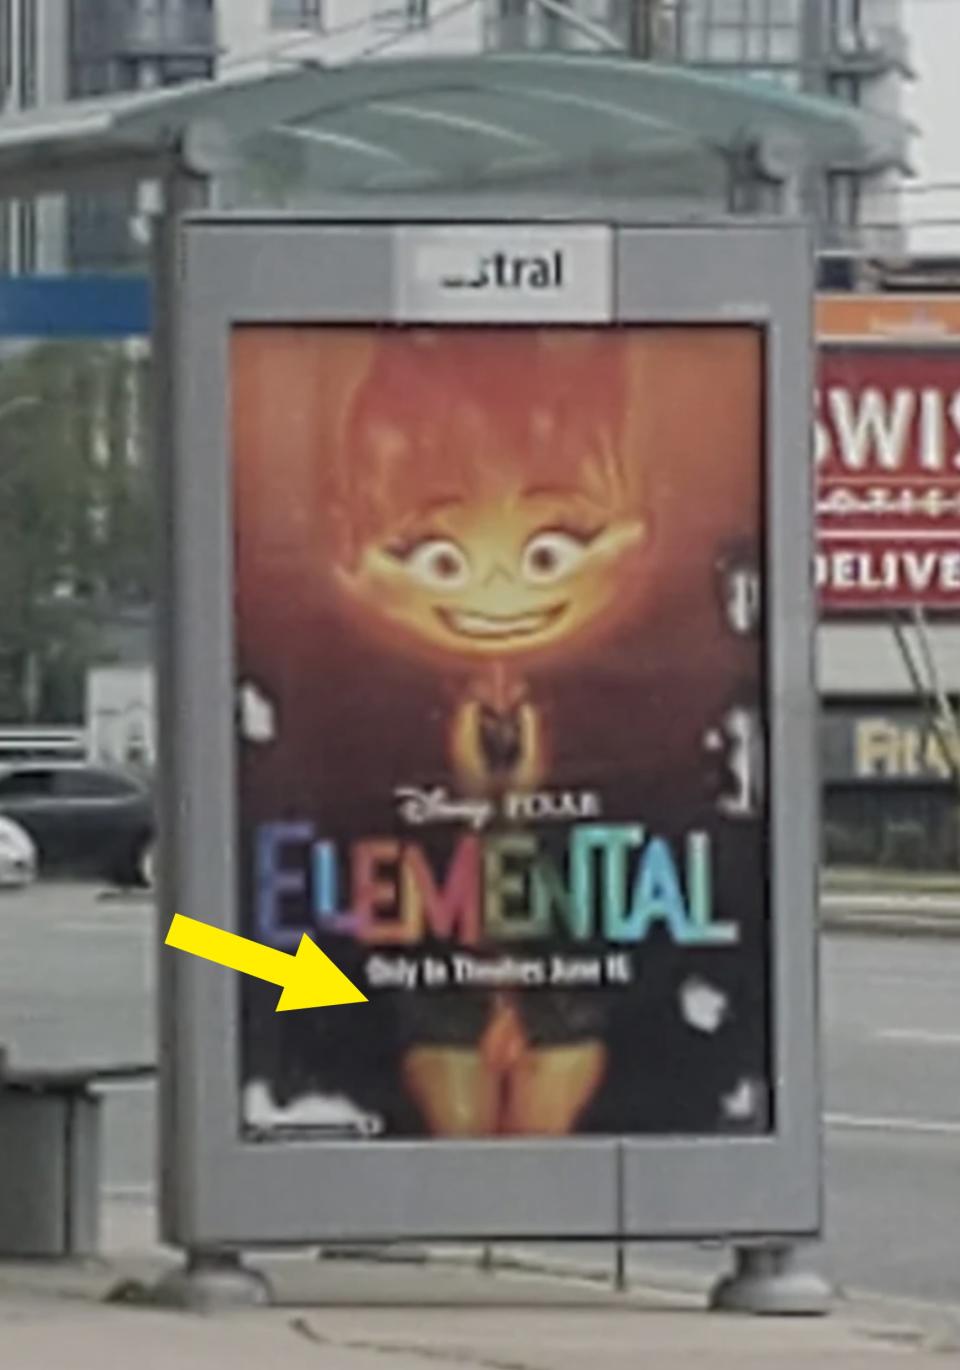 Arrow pointing at an "Elemental" poster